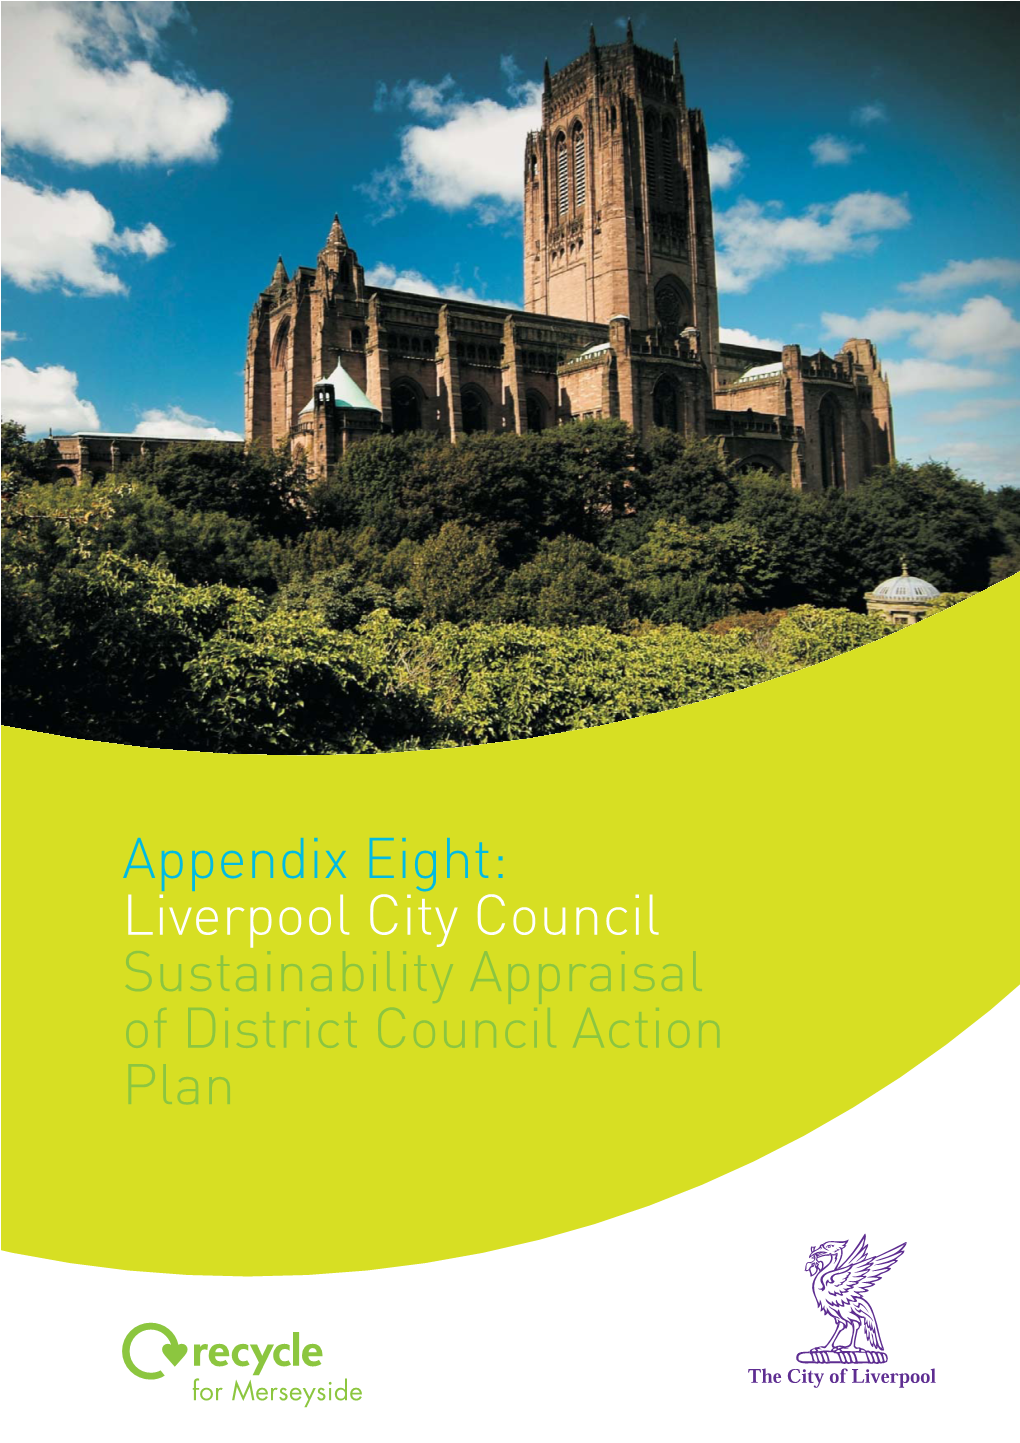 Appendix Eight: Liverpool City Council Sustainability Appraisal of District